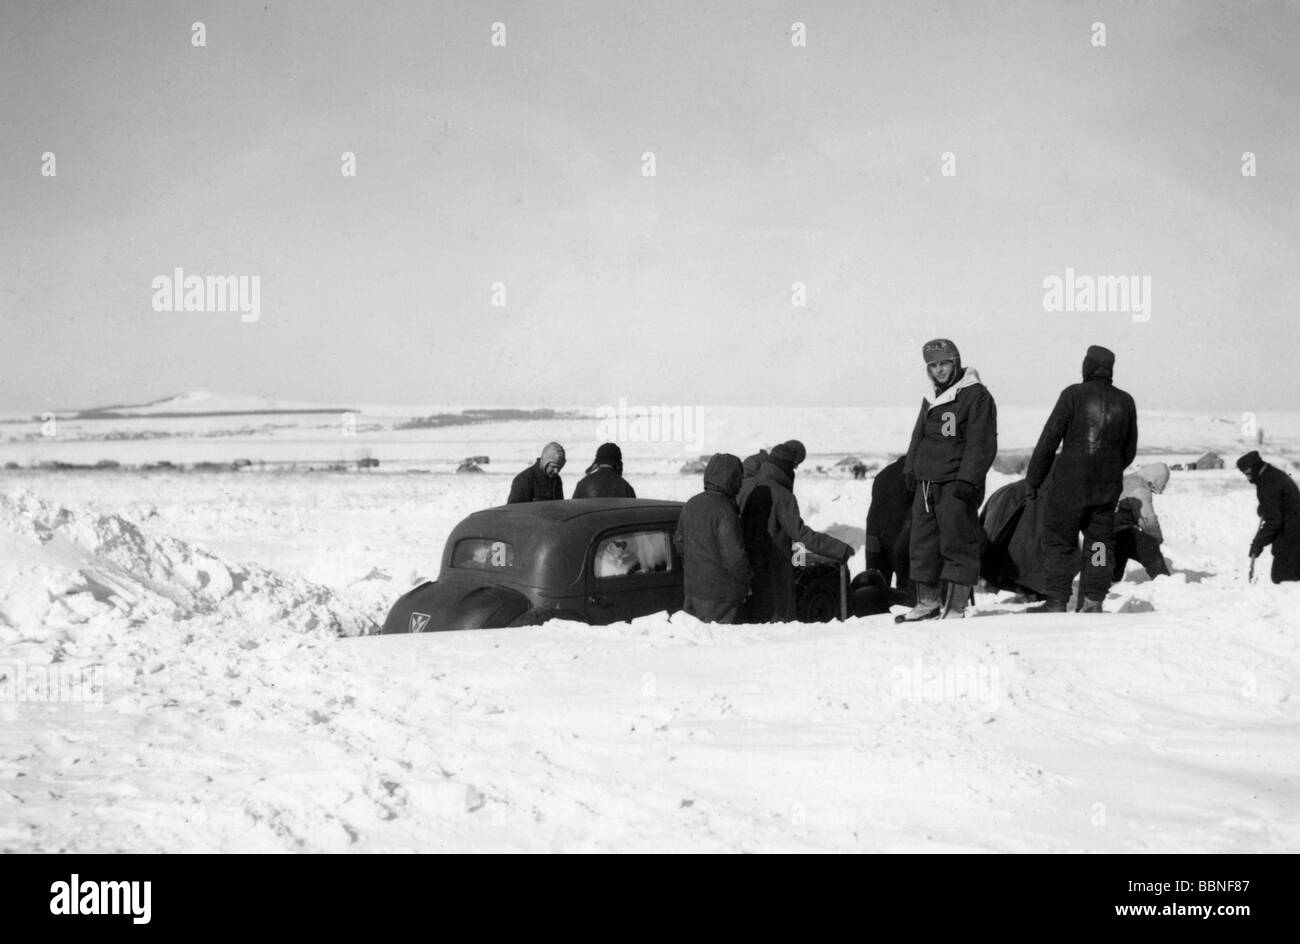 events, Second World War / WWII, Russia 1942 / 1943, German retreat to the Donets Basin, early February 1943, soldiers shoveling snow to free a stuck car, 20th century, historic, historical, vehicle, Wehrmacht, Third Reich, Eastern Front, Soviet Union, USSR, winter, Donec, people, 1940s, Stock Photo